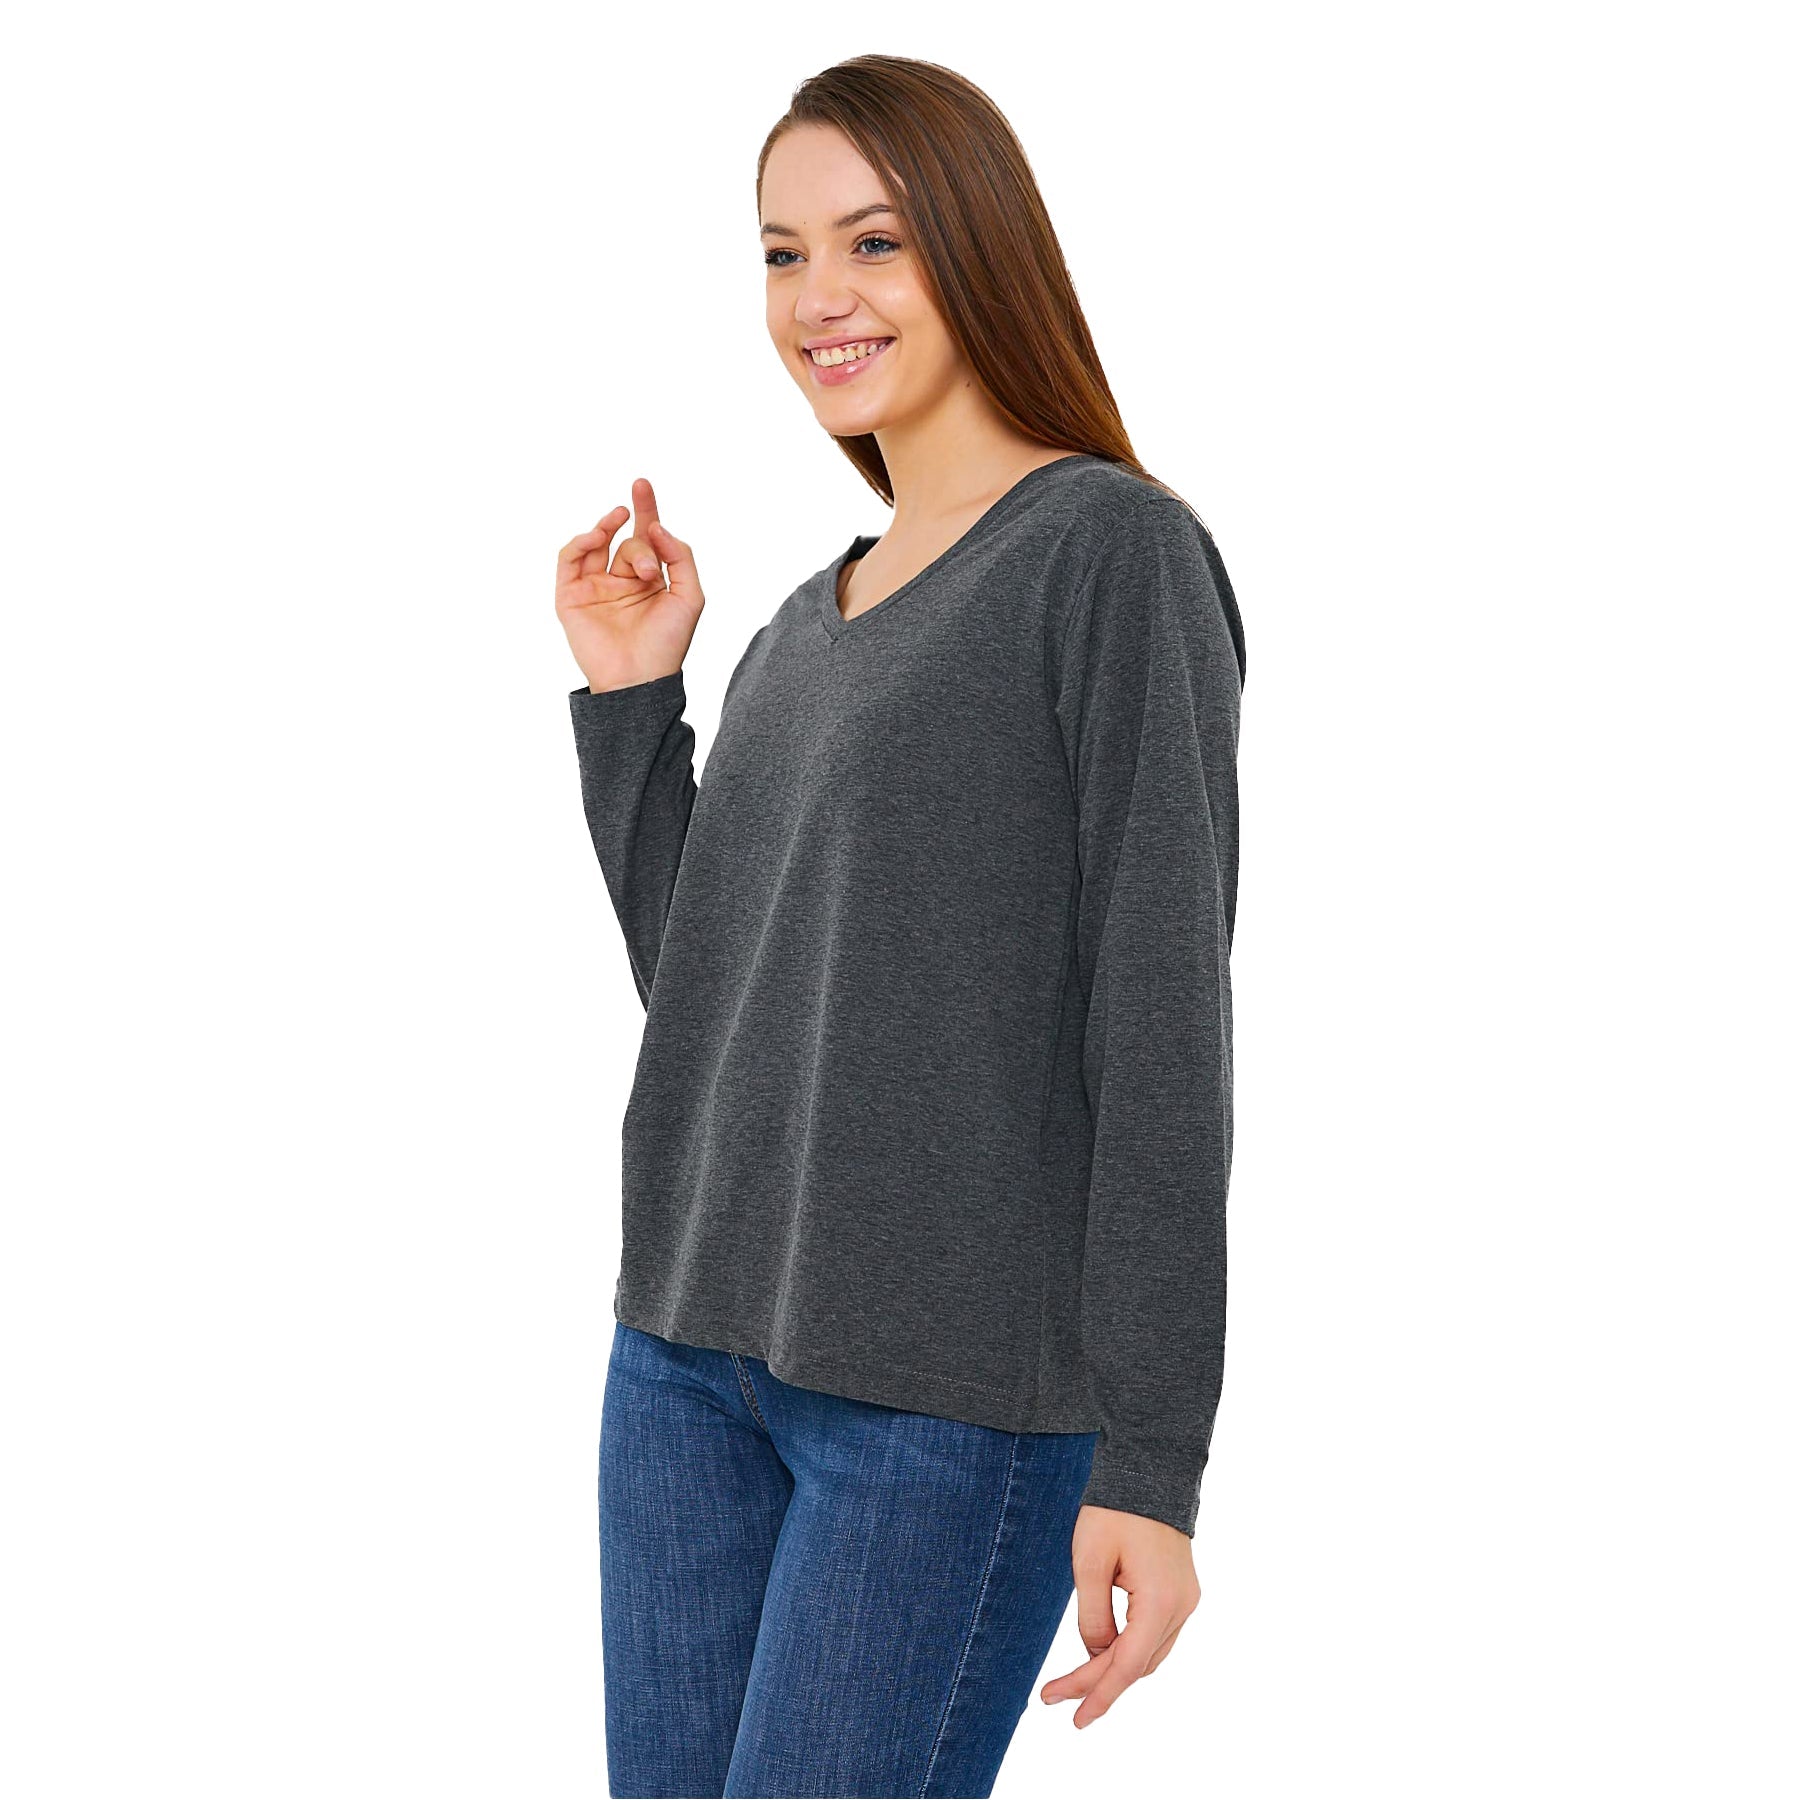 Buy dk-heather-gray Long Sleeve V-Neck Shirts for Women &amp; Girls - Colorful Pima Cotton